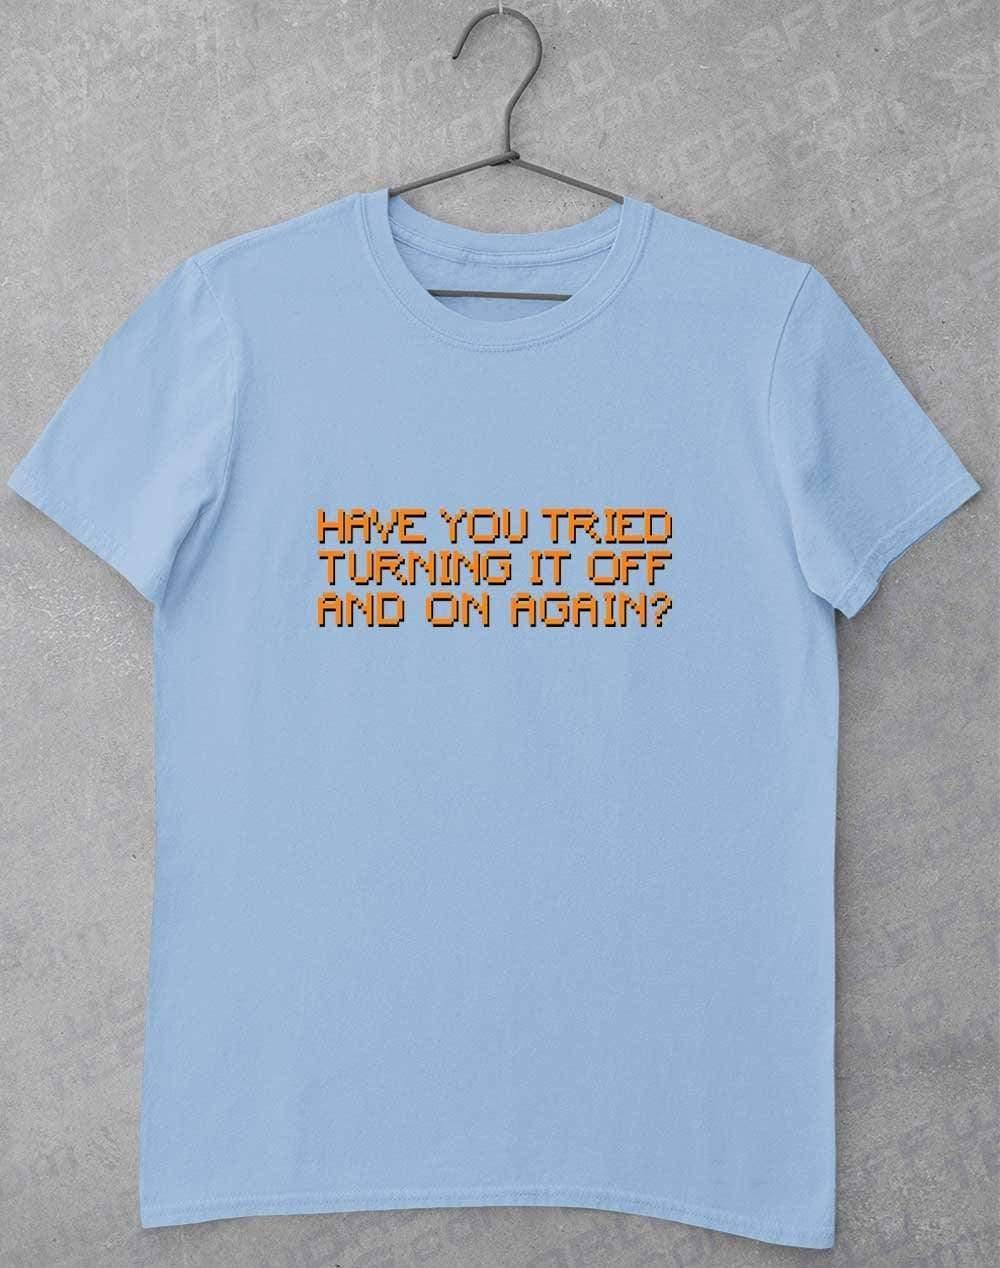 Off and On Again T-Shirt S / Light Blue  - Off World Tees